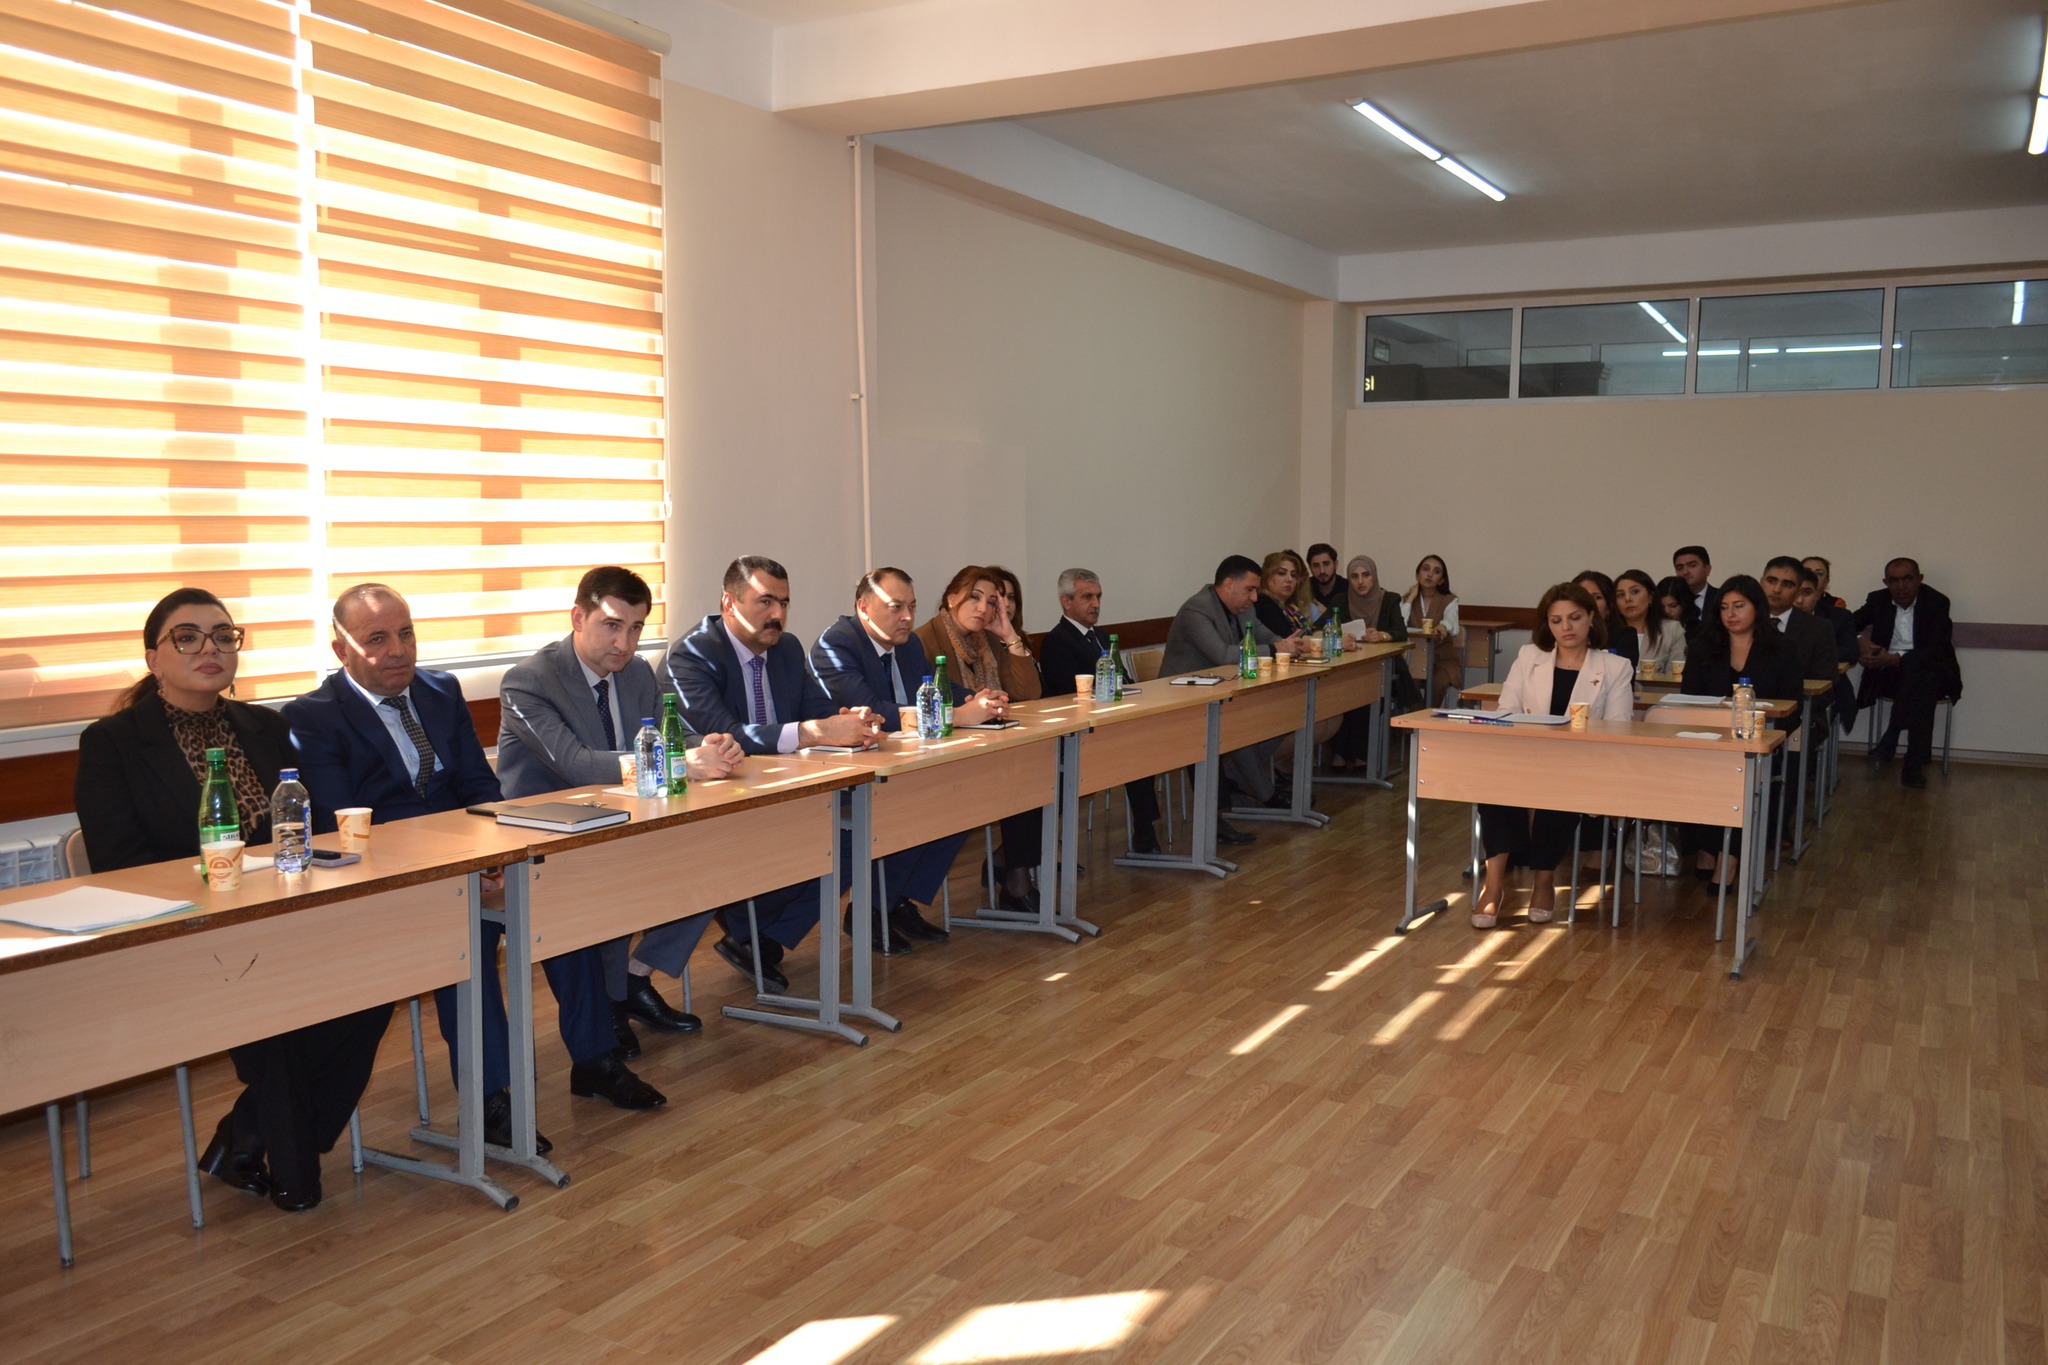 A republican scientific-practical conference was held on “Main principles of sustainable development and reintegration in territories freed from occupation”